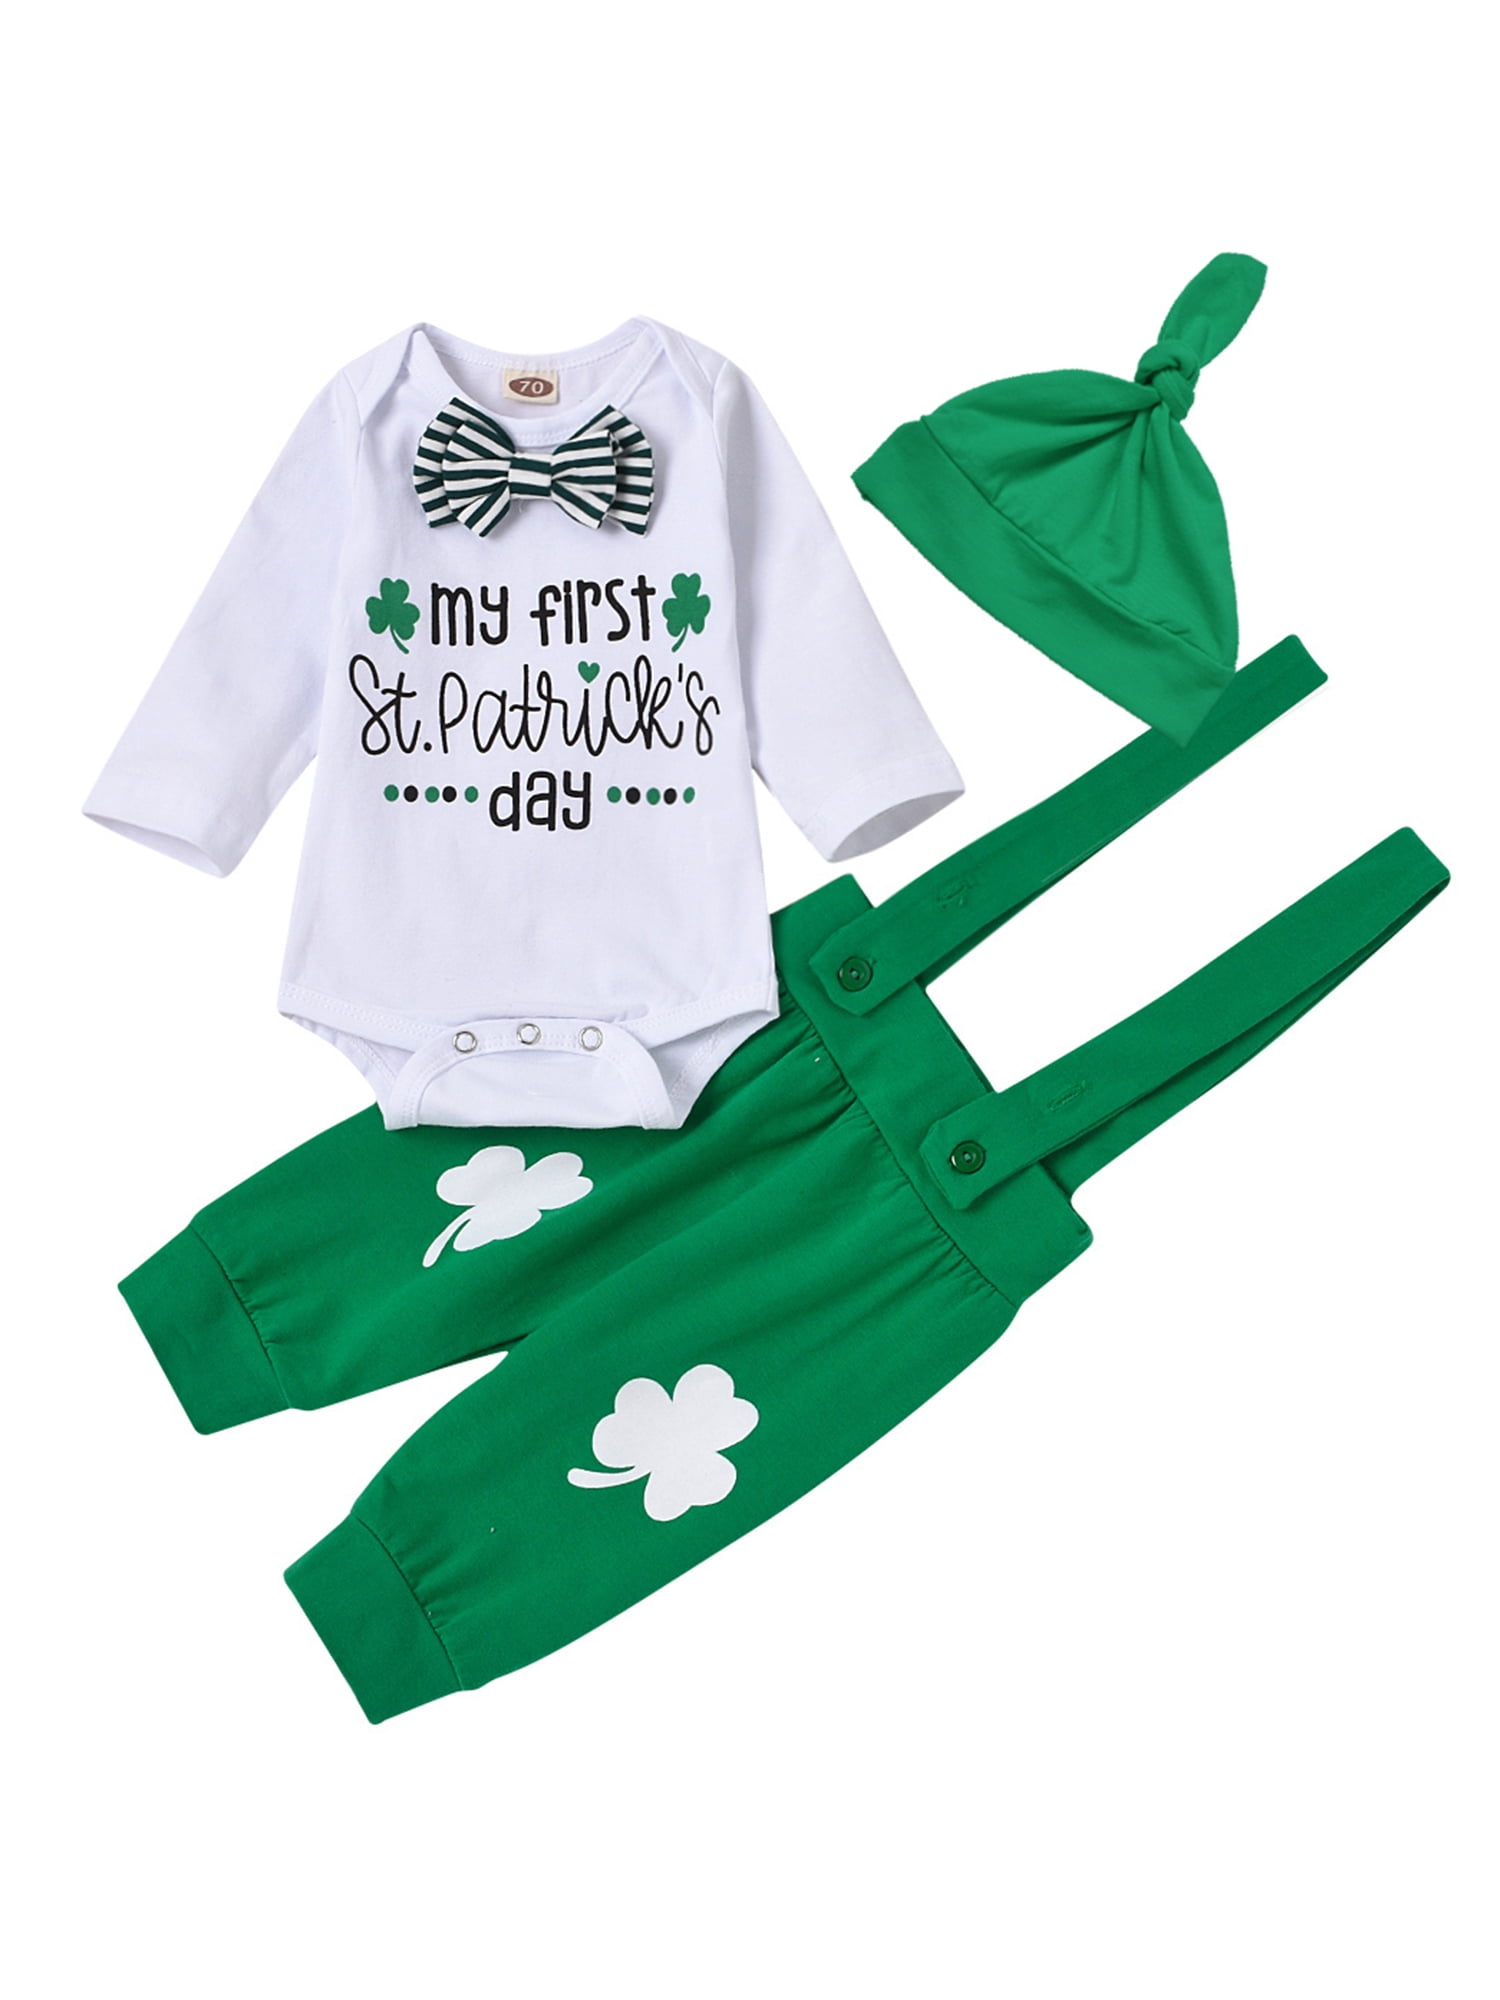 4Pcs Outfit Set Clover Baby Boy Girls My First St Patricks Day Pant Clothing Set 